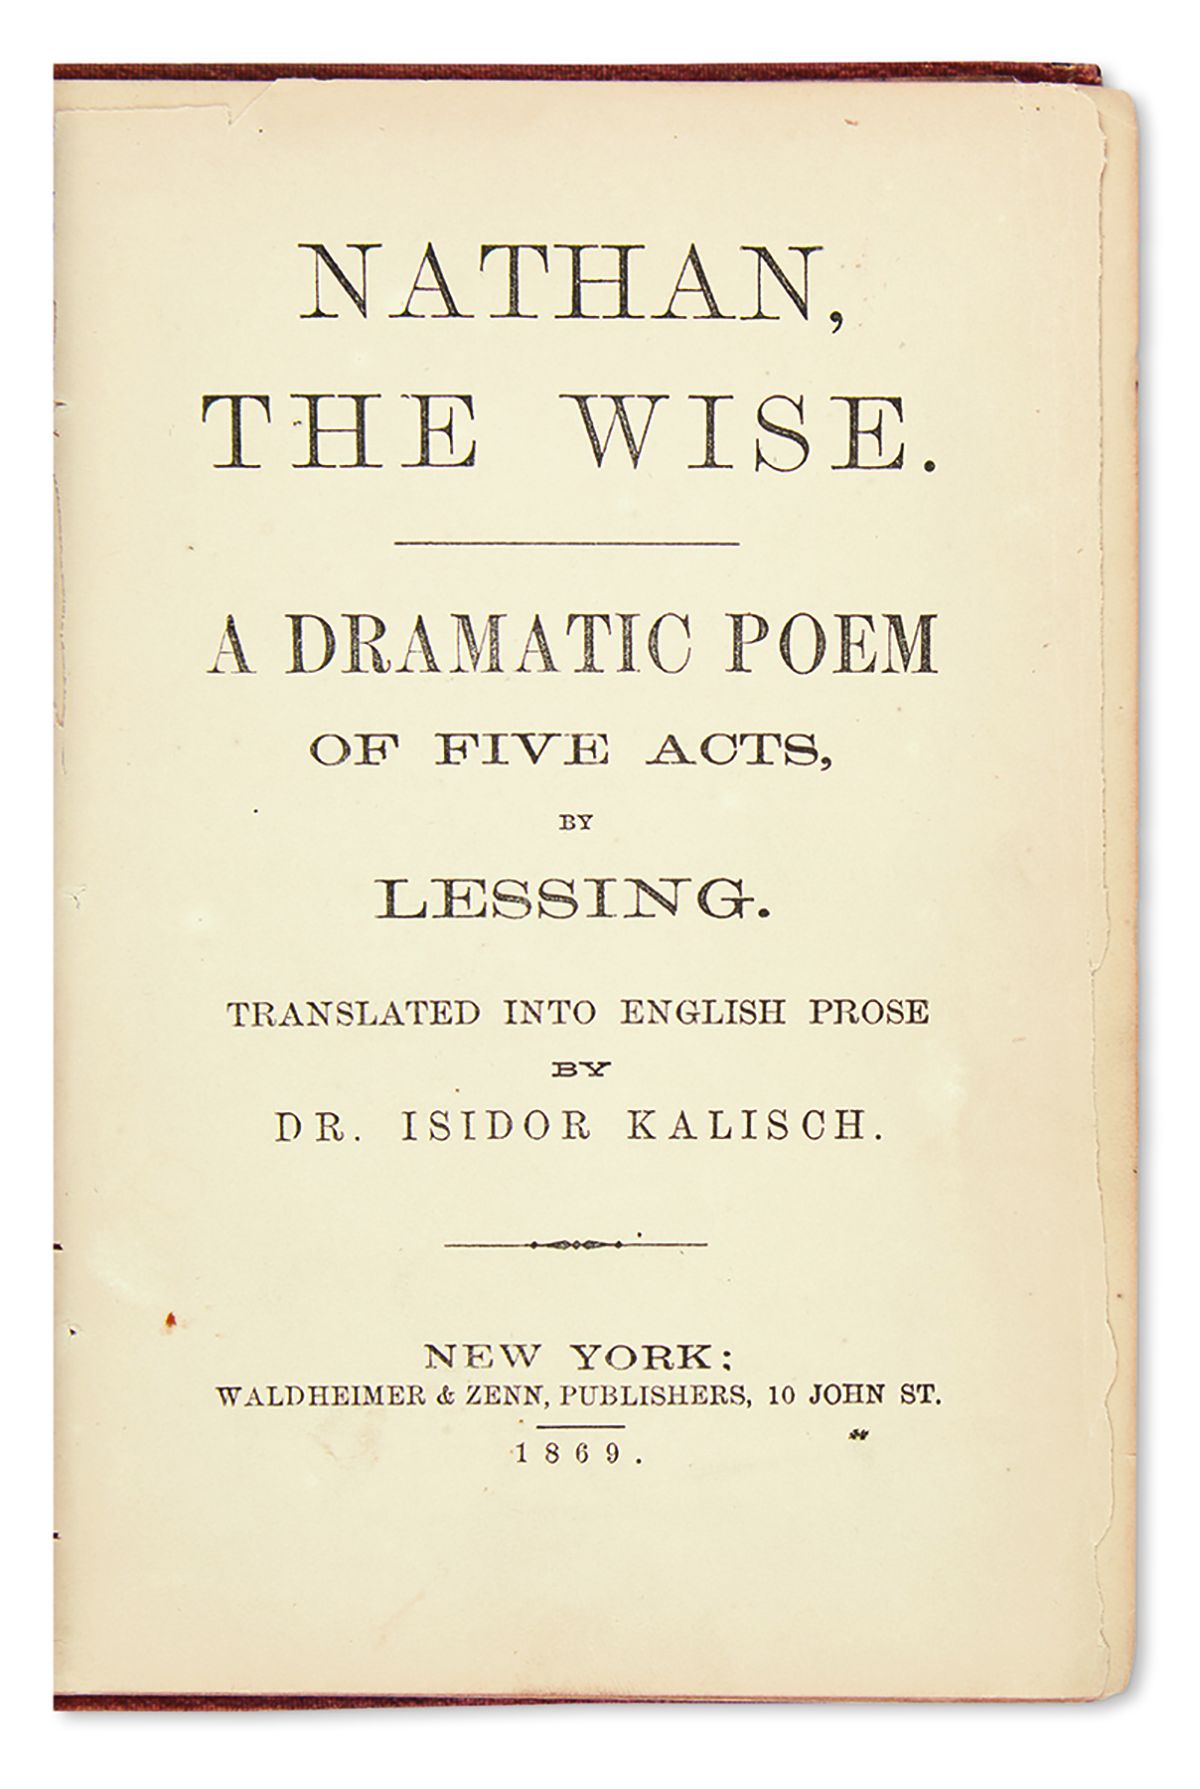 Nathan the Wise. A Dramatic Poem of Five Acts by Lessing. Translated into English Prose by Dr. <<Isidor Kalisch.>>